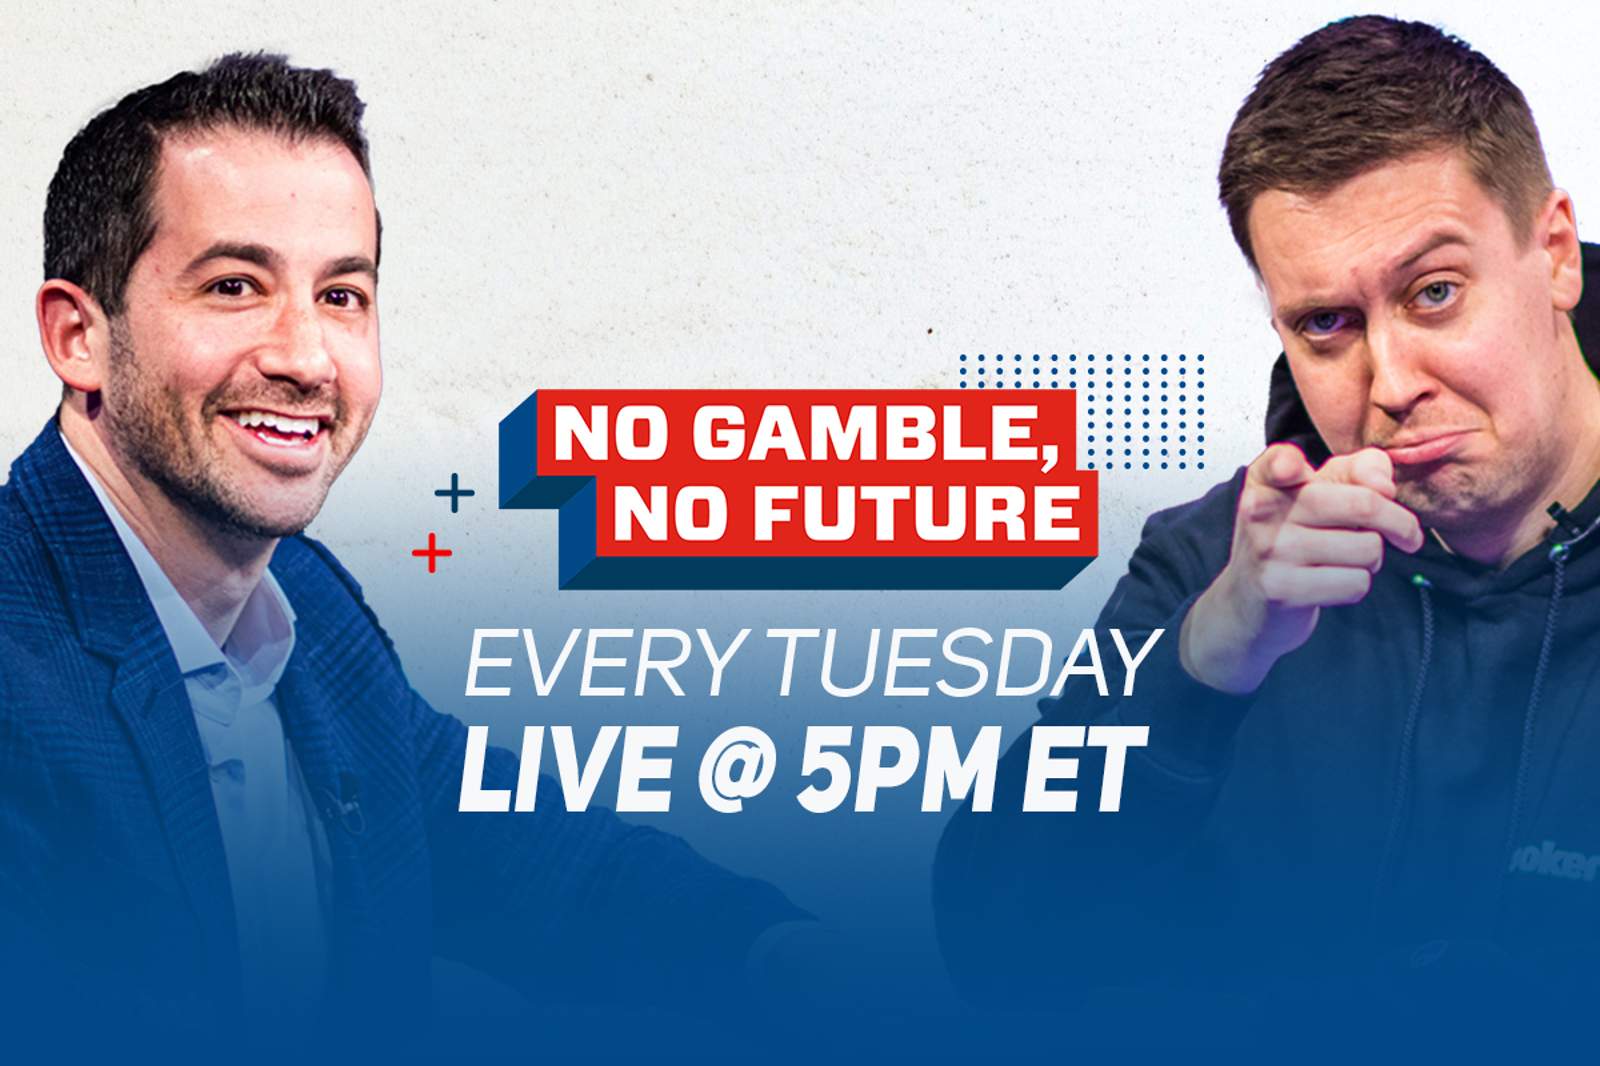 No Gamble, No Future Episode 10 on Today at 5 p.m. ET with Nick Schulman and Ali Nejad